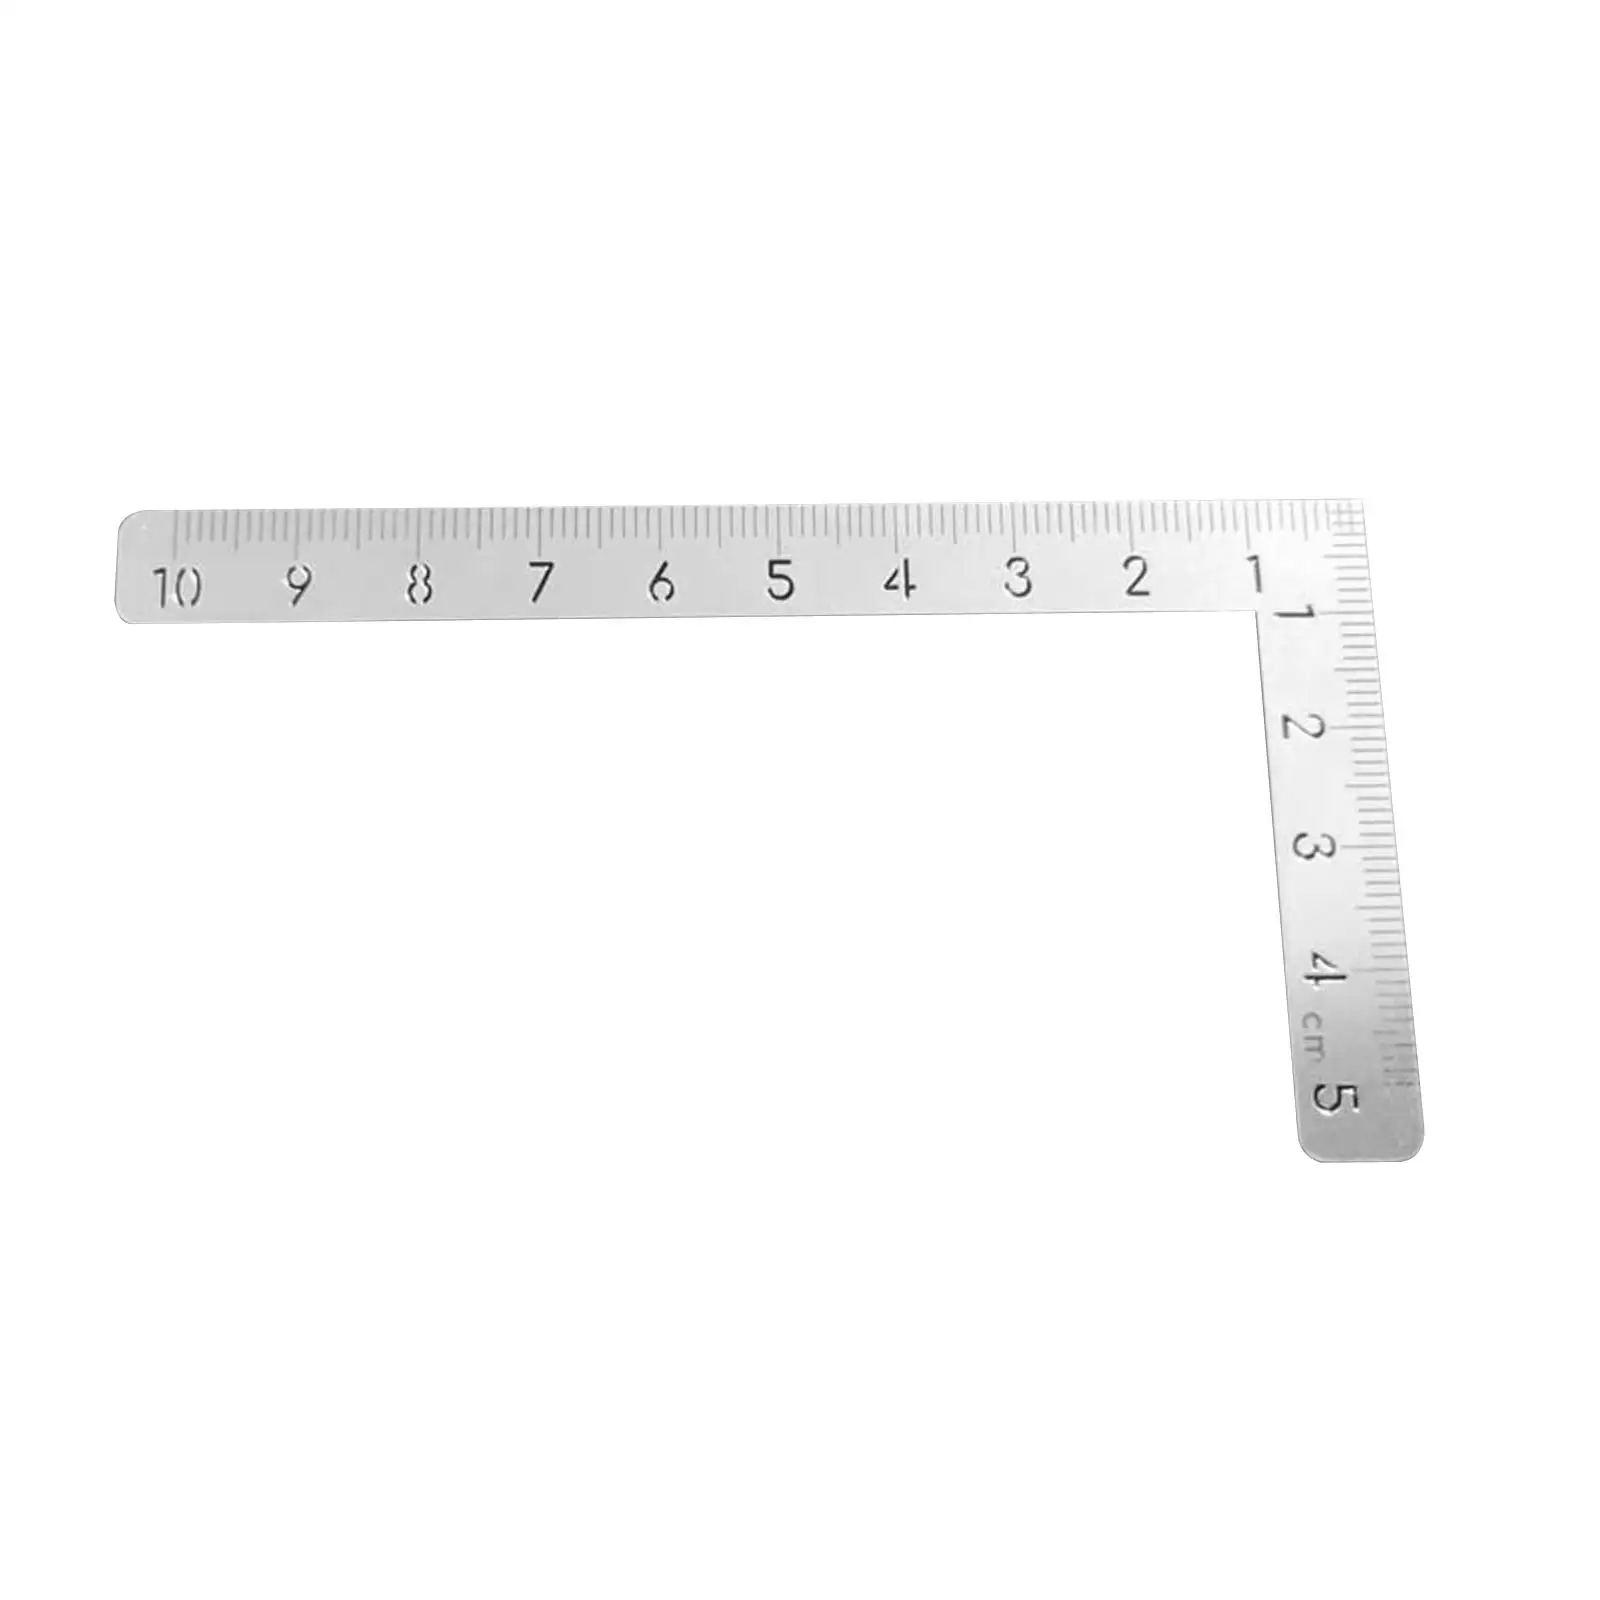 Leather Craft Ruler Carpentry Squares Stainless Steel Mini Measuring for Drafting Tools Model Making Tools Hobby Tailor Engineer